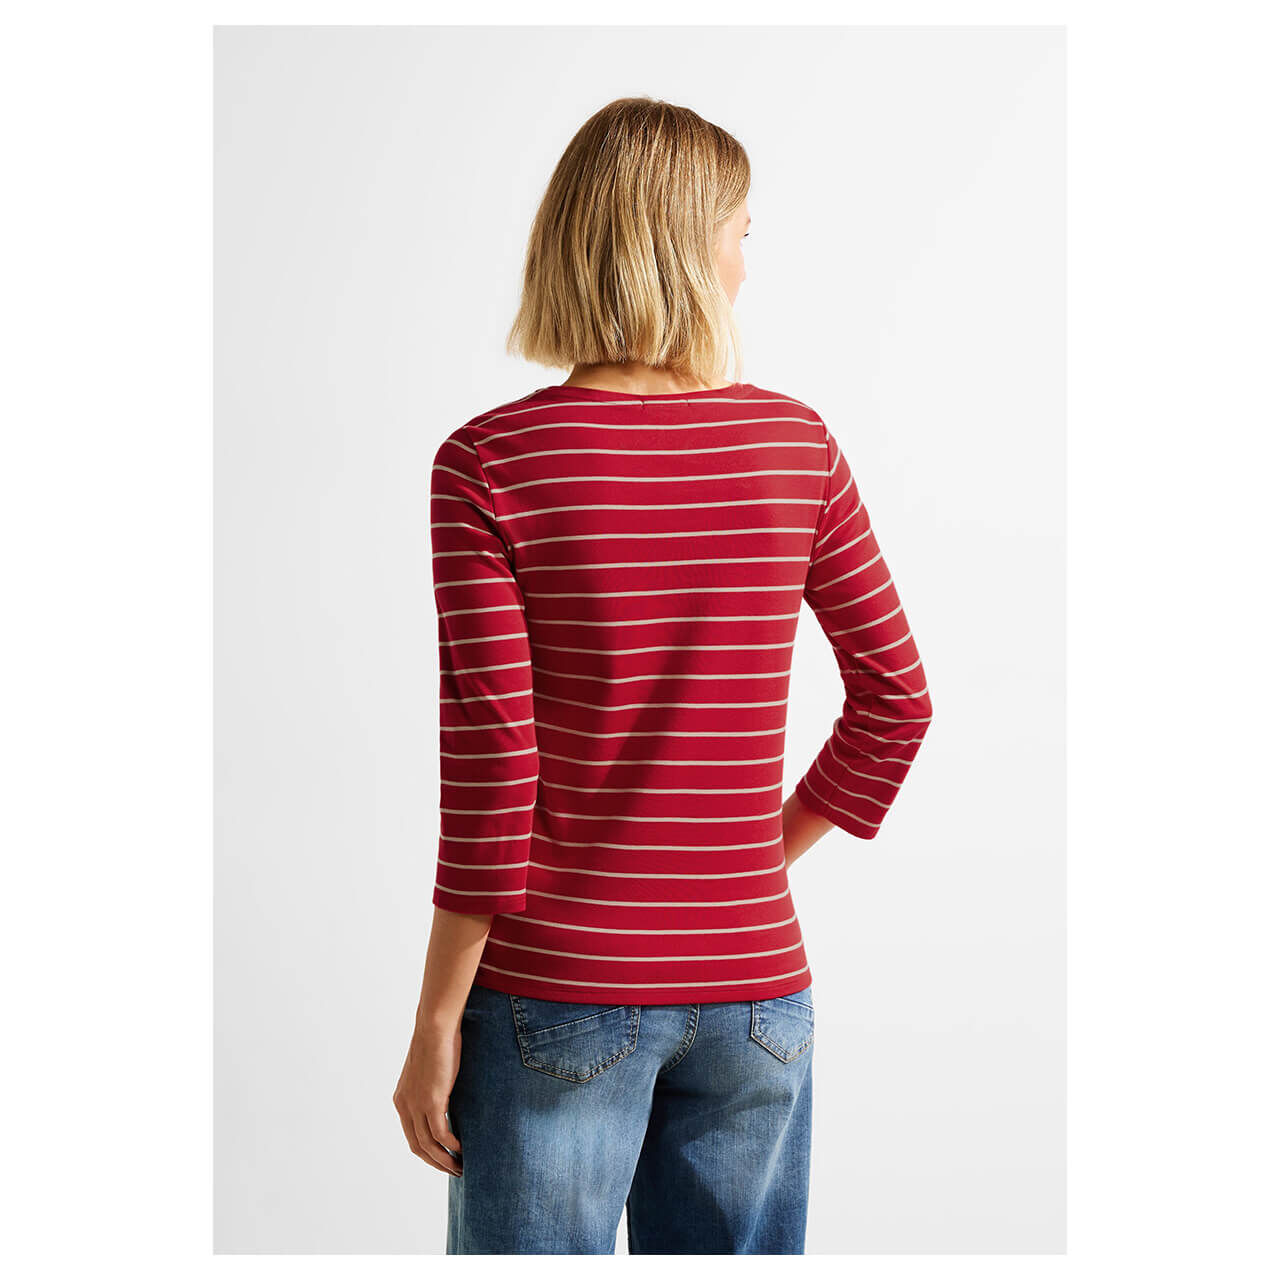 Cecil Basic Boatneck 3/4 Arm Shirt casual red stripes